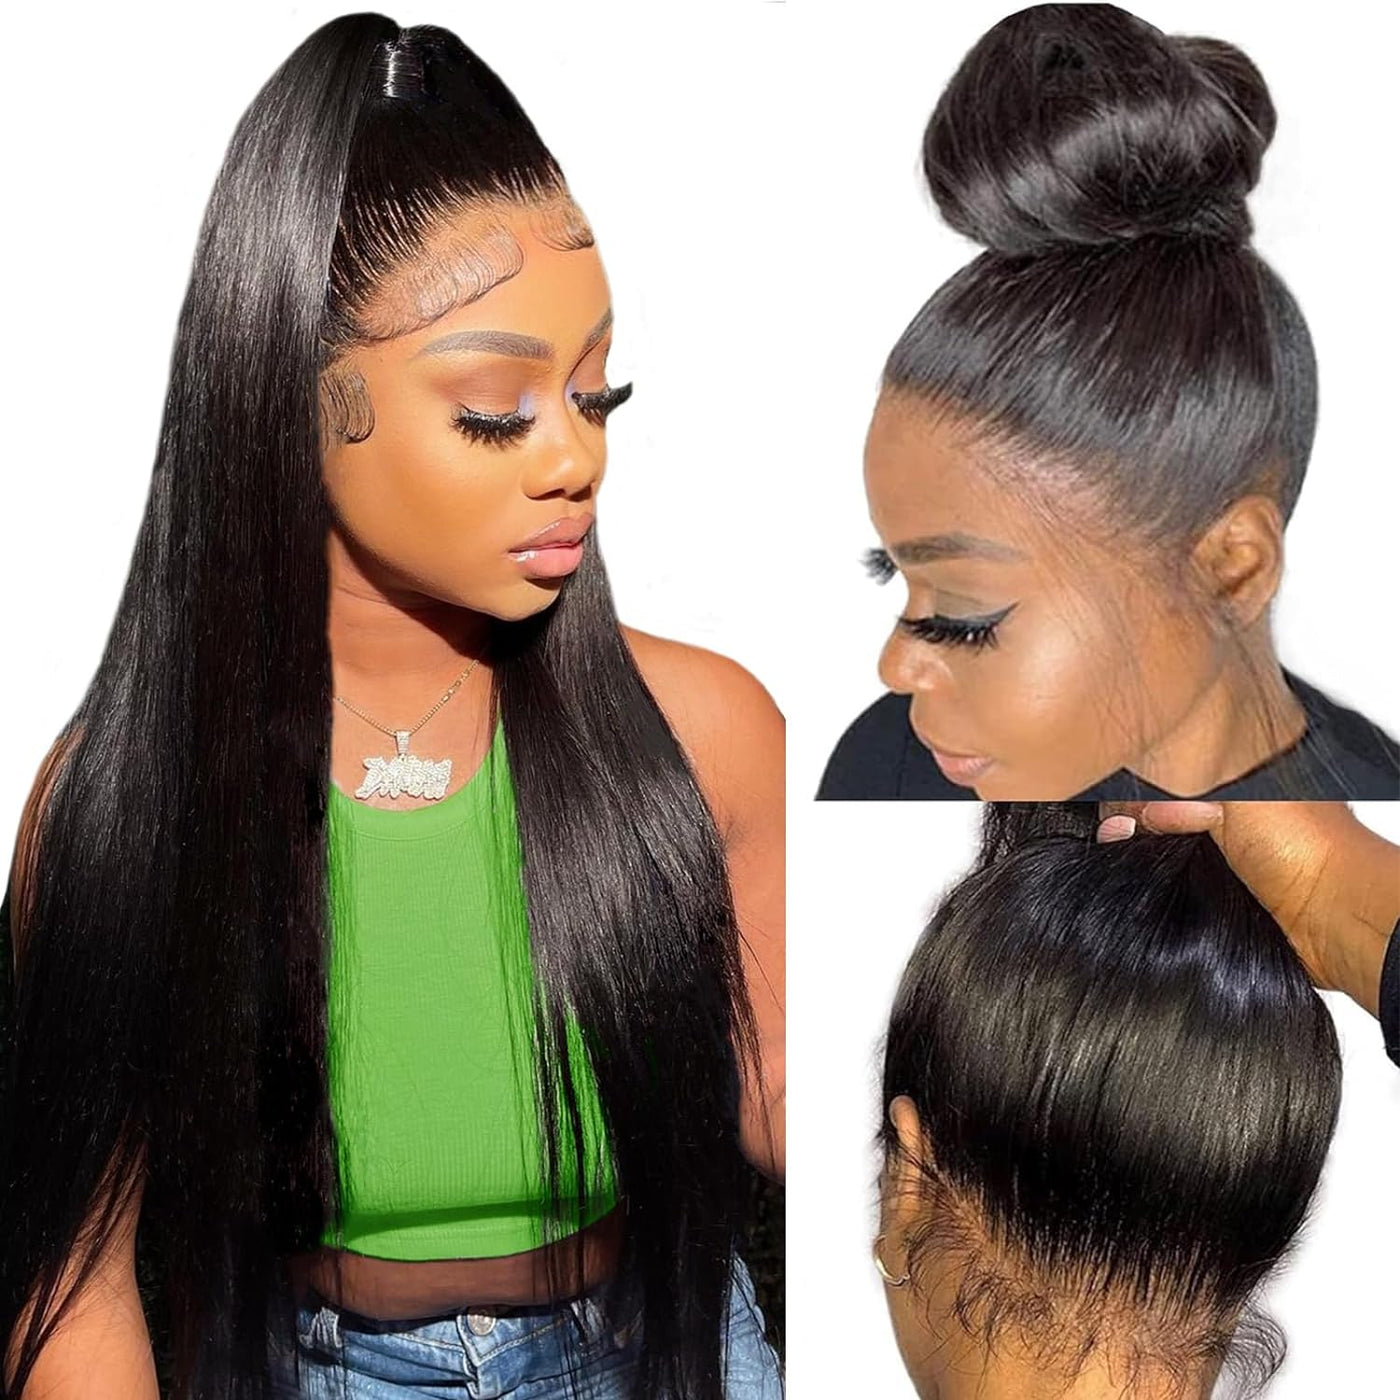 Human Hair 360 Lace Front Wigs Body Wave 360 Lace Wig Transparent Lace Frontal Wigs Black Color - GeetaHair